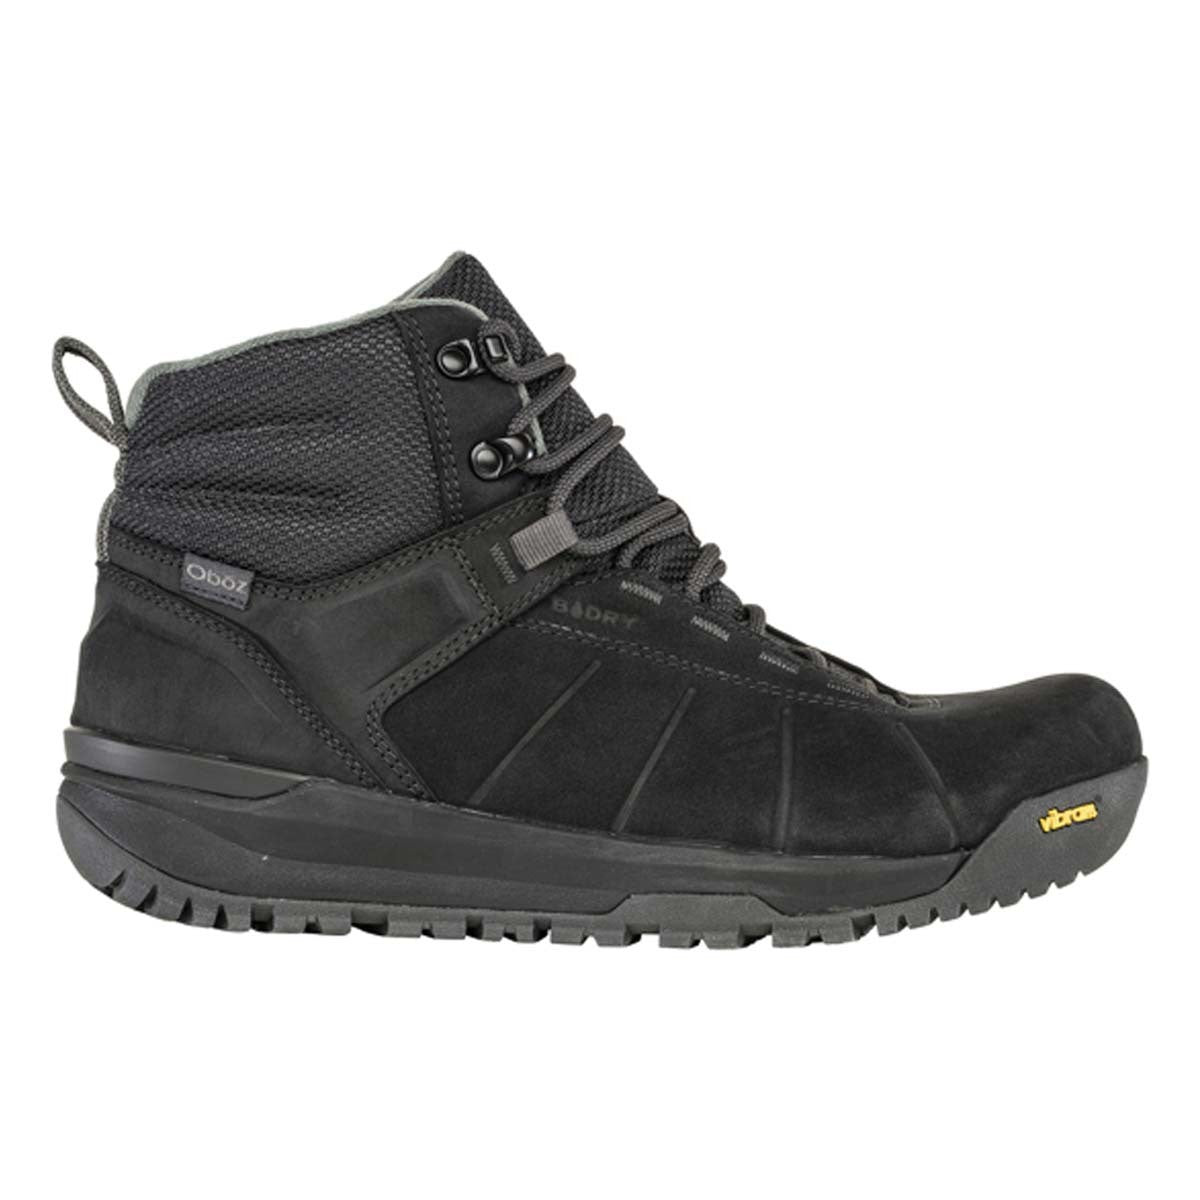 Oboz Men's Andesite Mid Insulated Hiking Boots